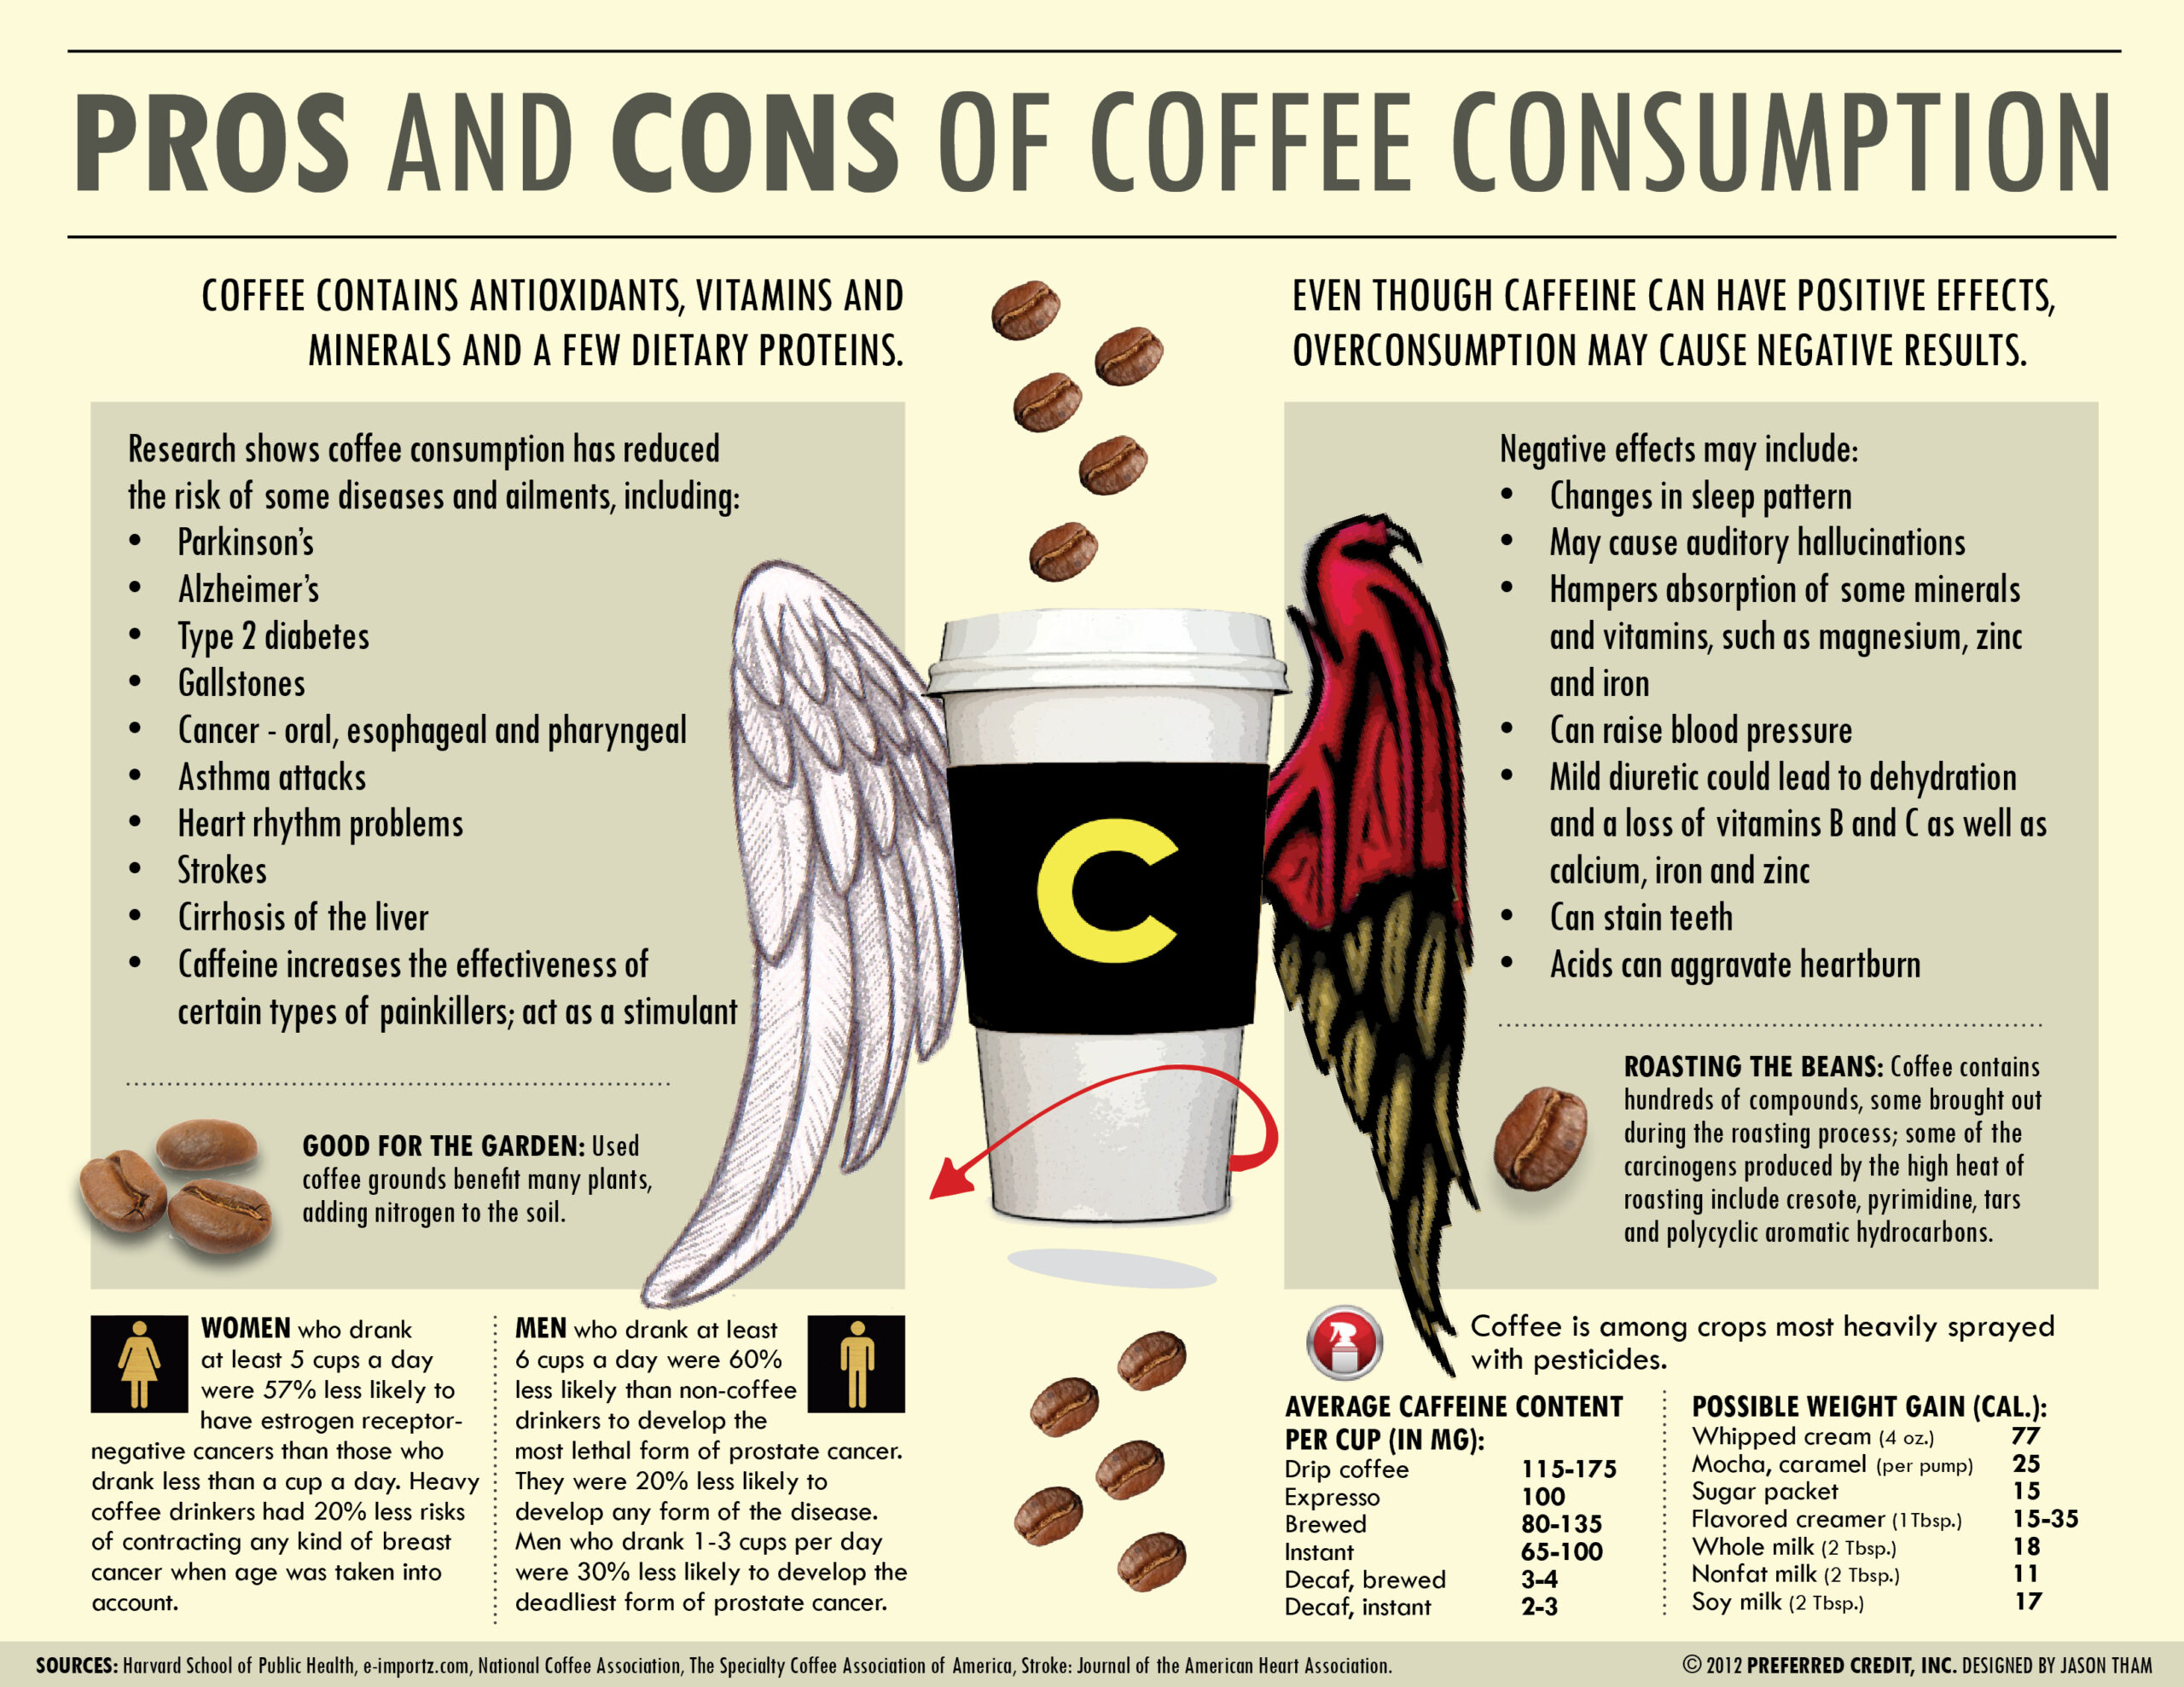 The Coffee Facts | Visual.ly